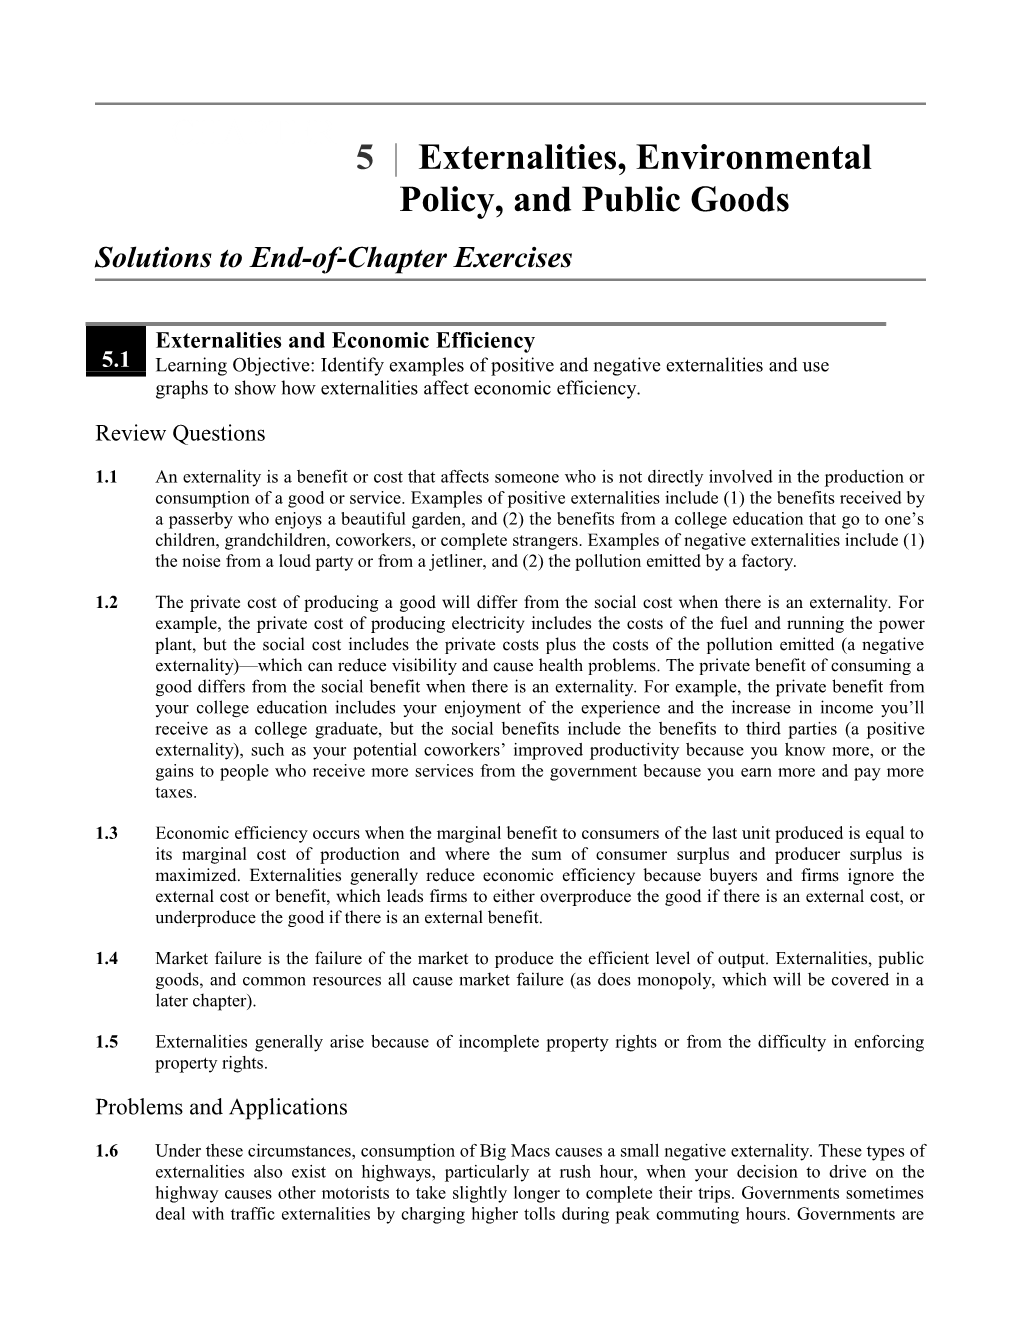 Policy, and Public Goods